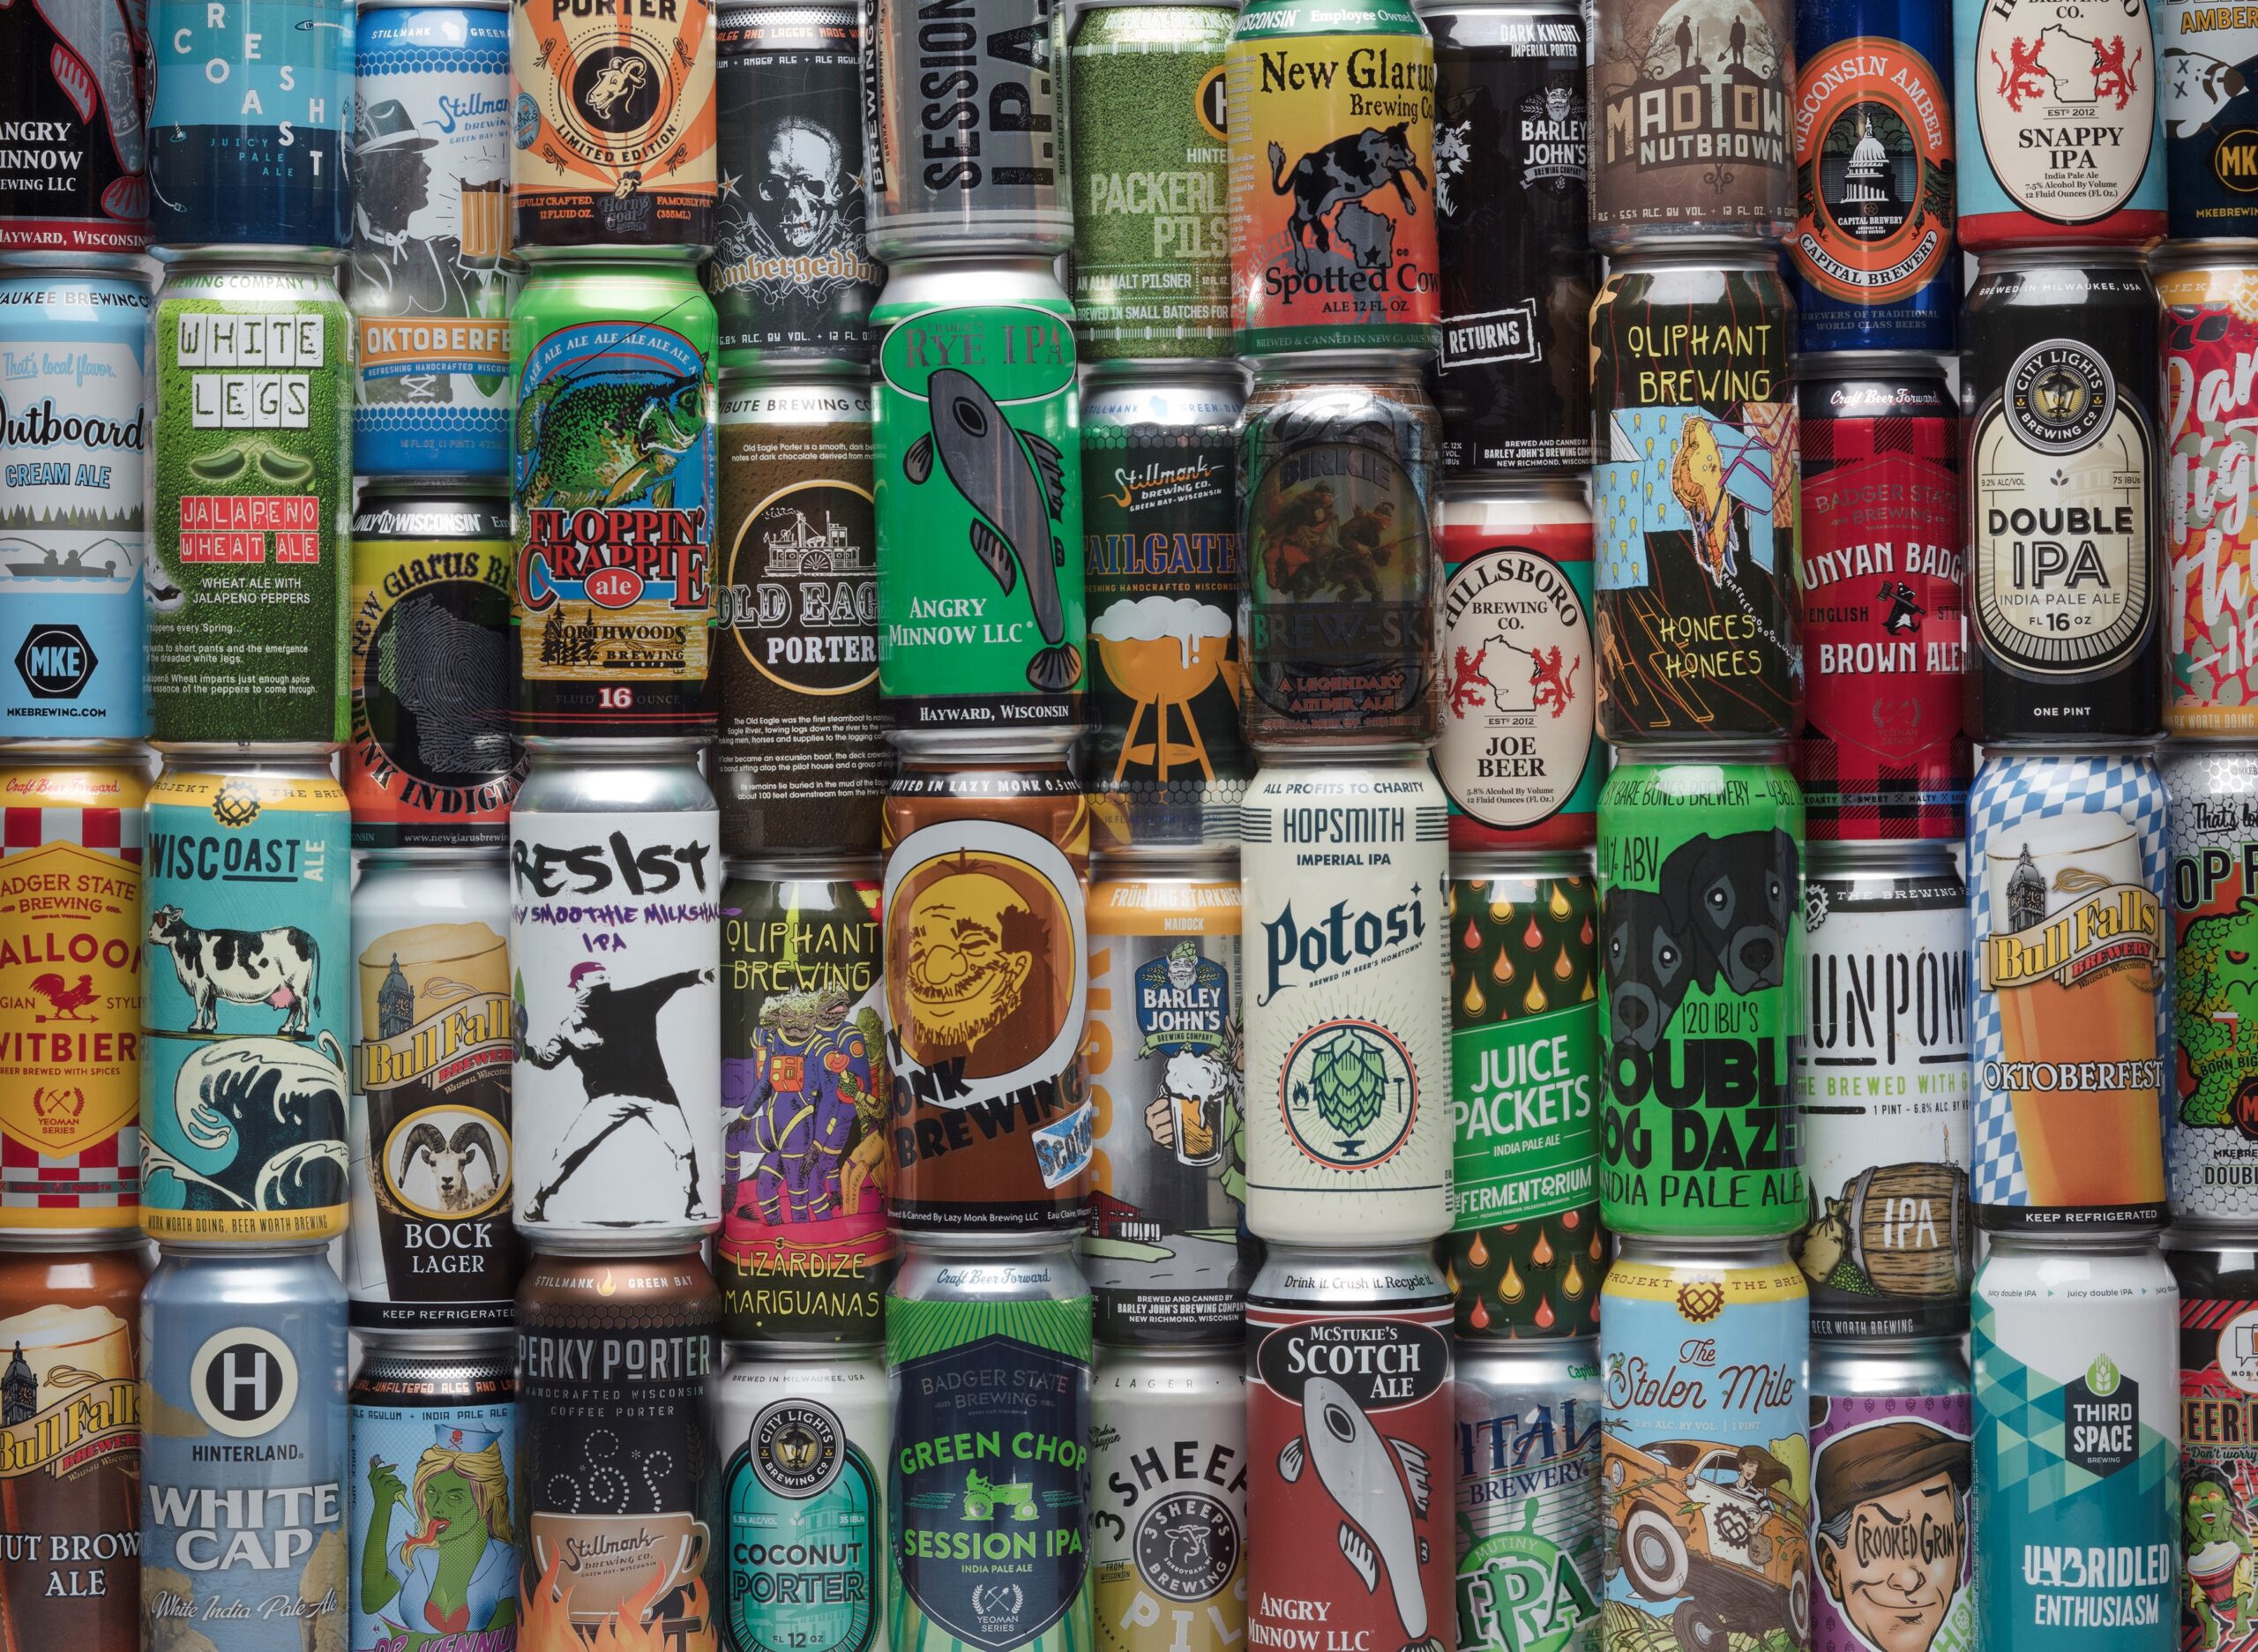 Canned craft beer was rare until the early 2010s